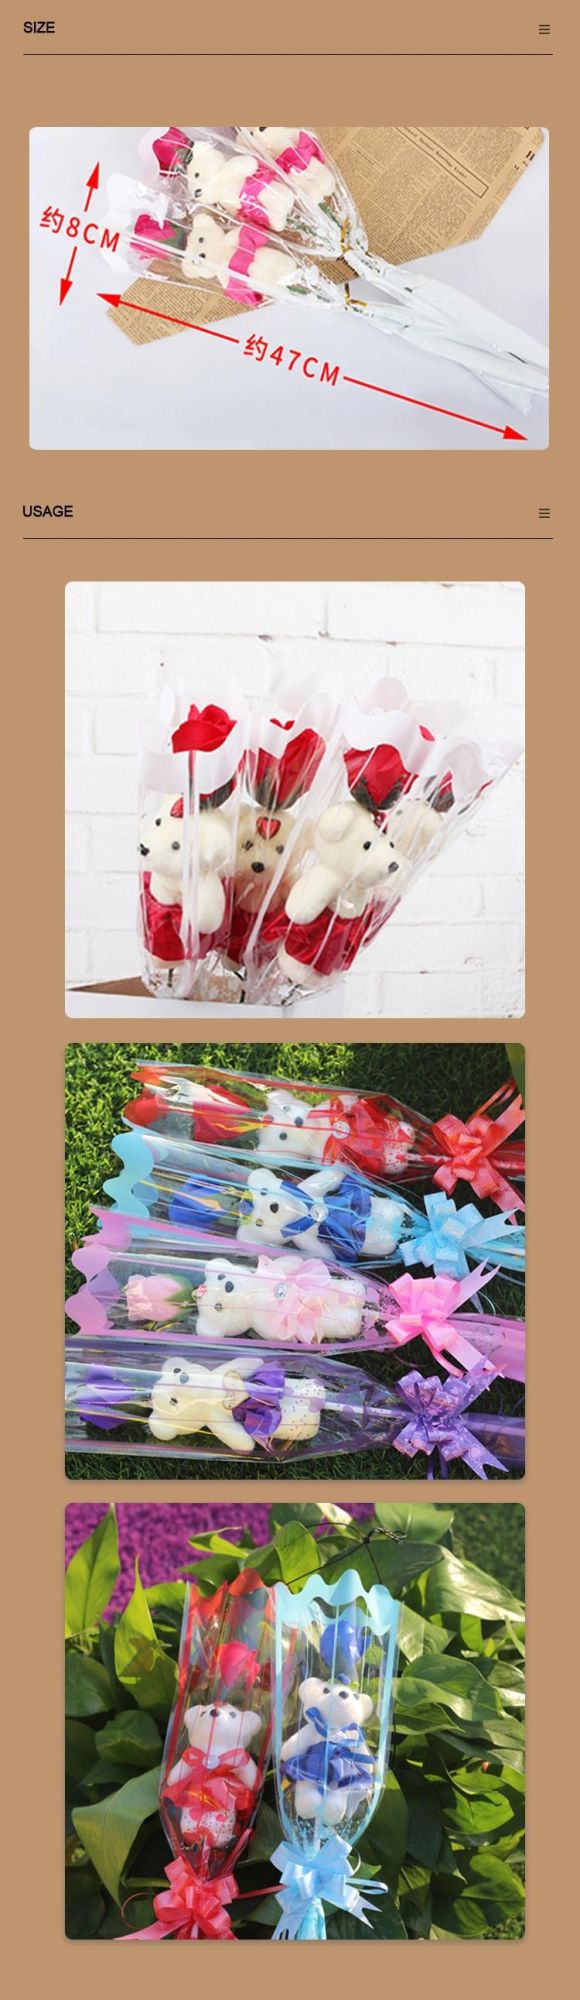 Hot Sale Artificial Soap Flower Rose Teddy Bear Gifts for Christmas, Valentine′s Day, Mother′s Day